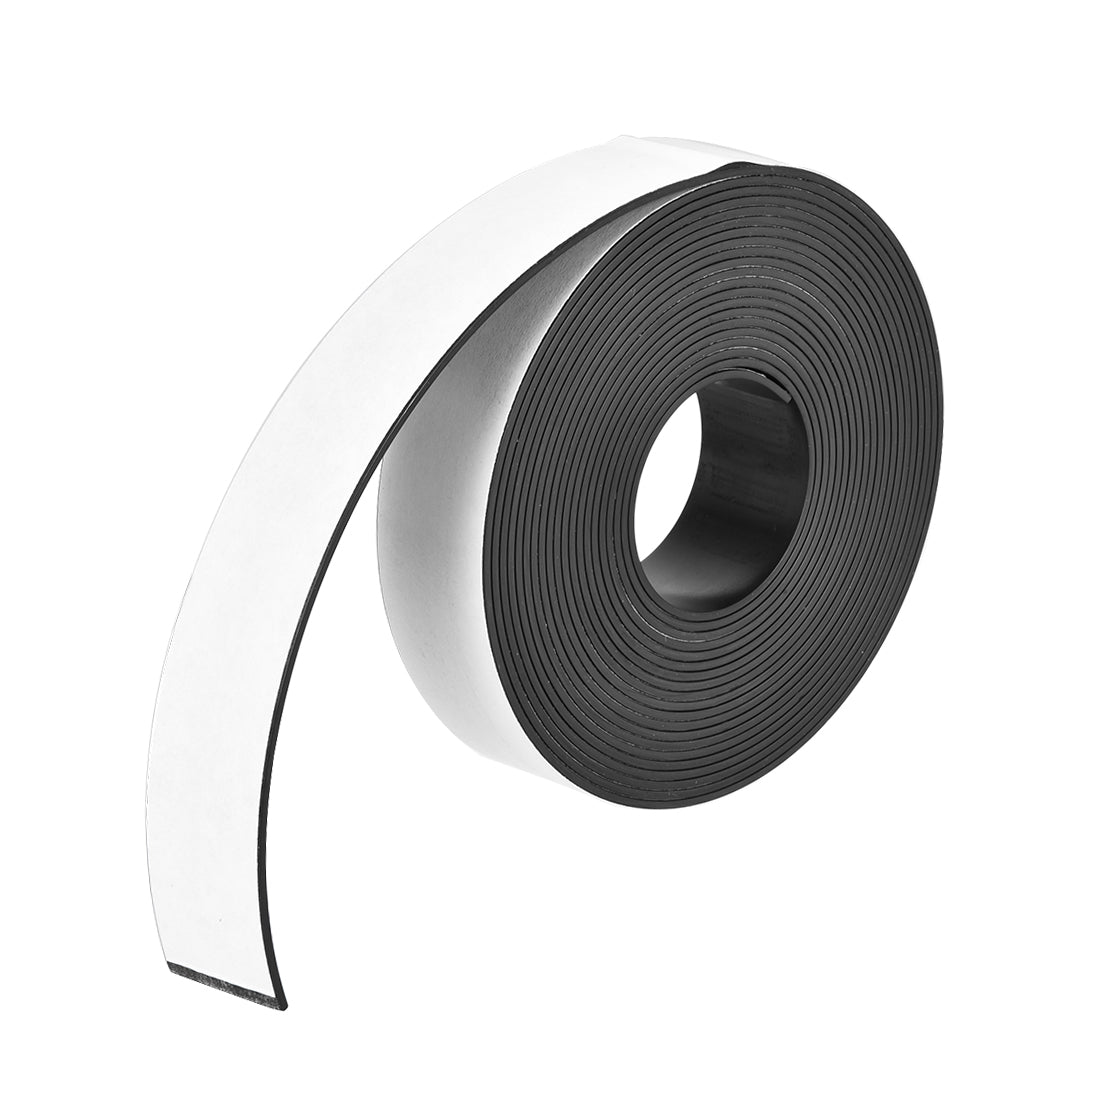 Uxcell Uxcell Adhesive Black Magnetic Strip W White Cover 1 3/16 Inch x 16.4 Feet x 1/16Inch